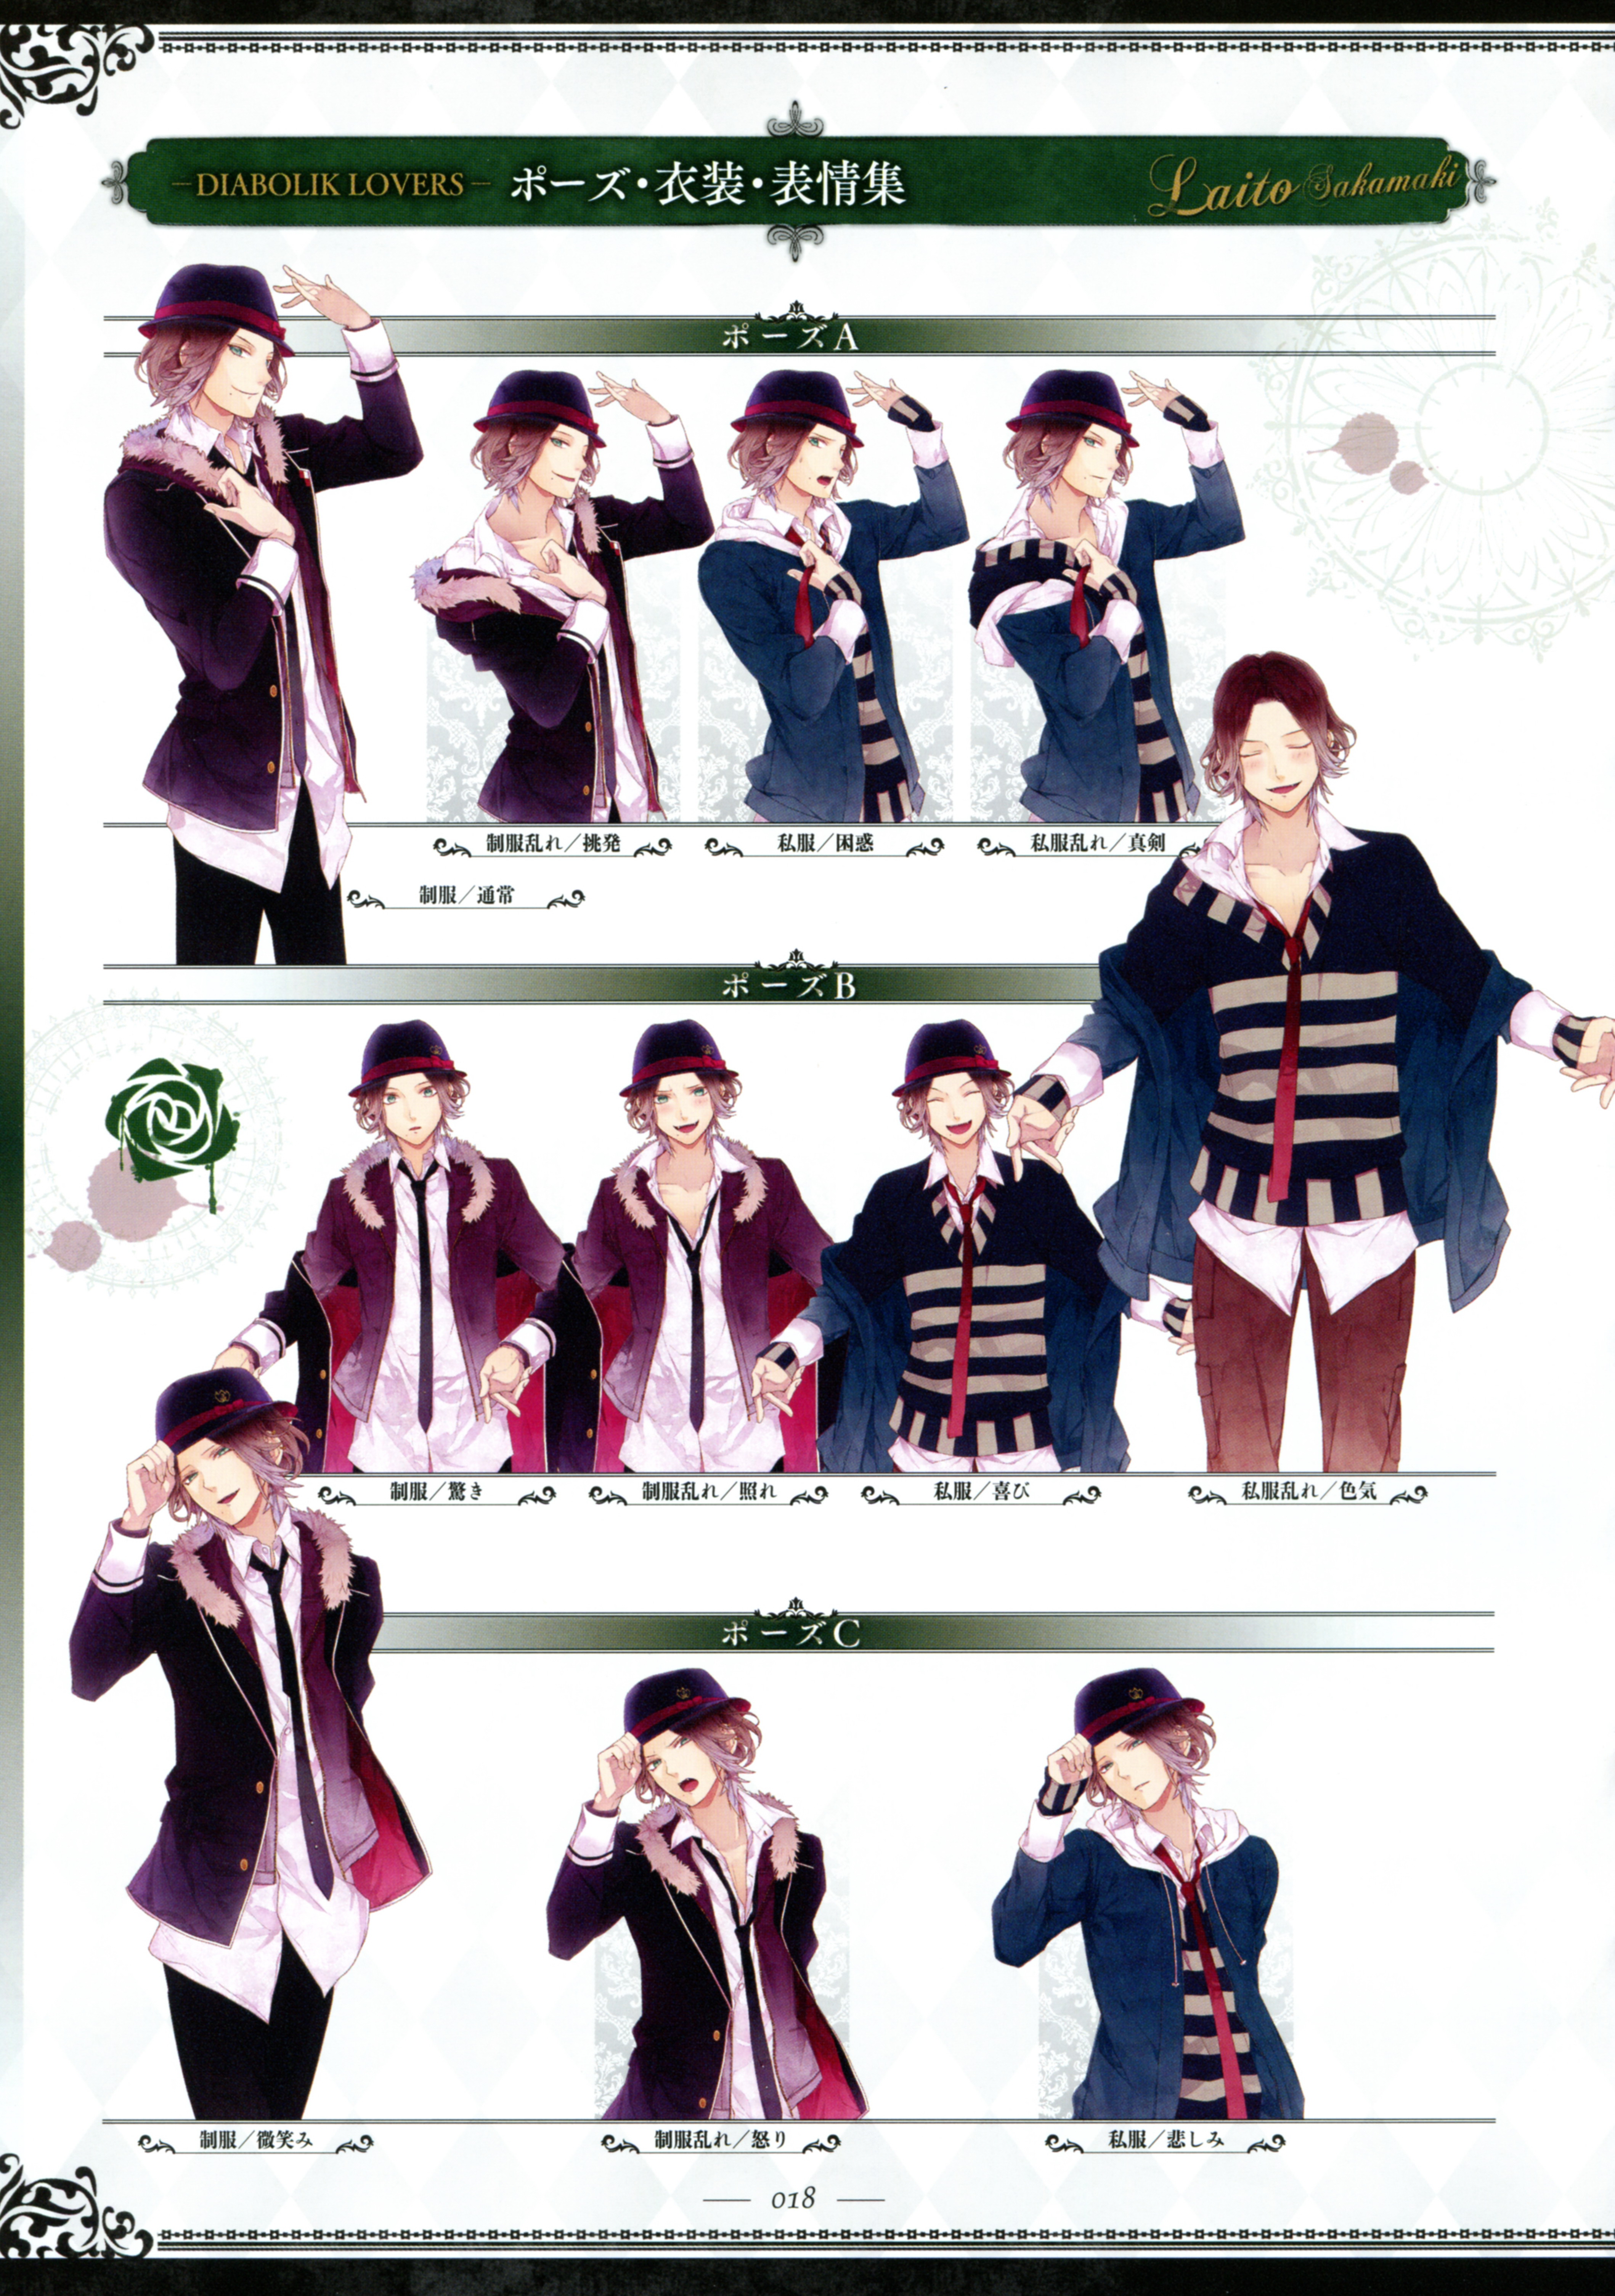 what is the diabolik lovers characters heights